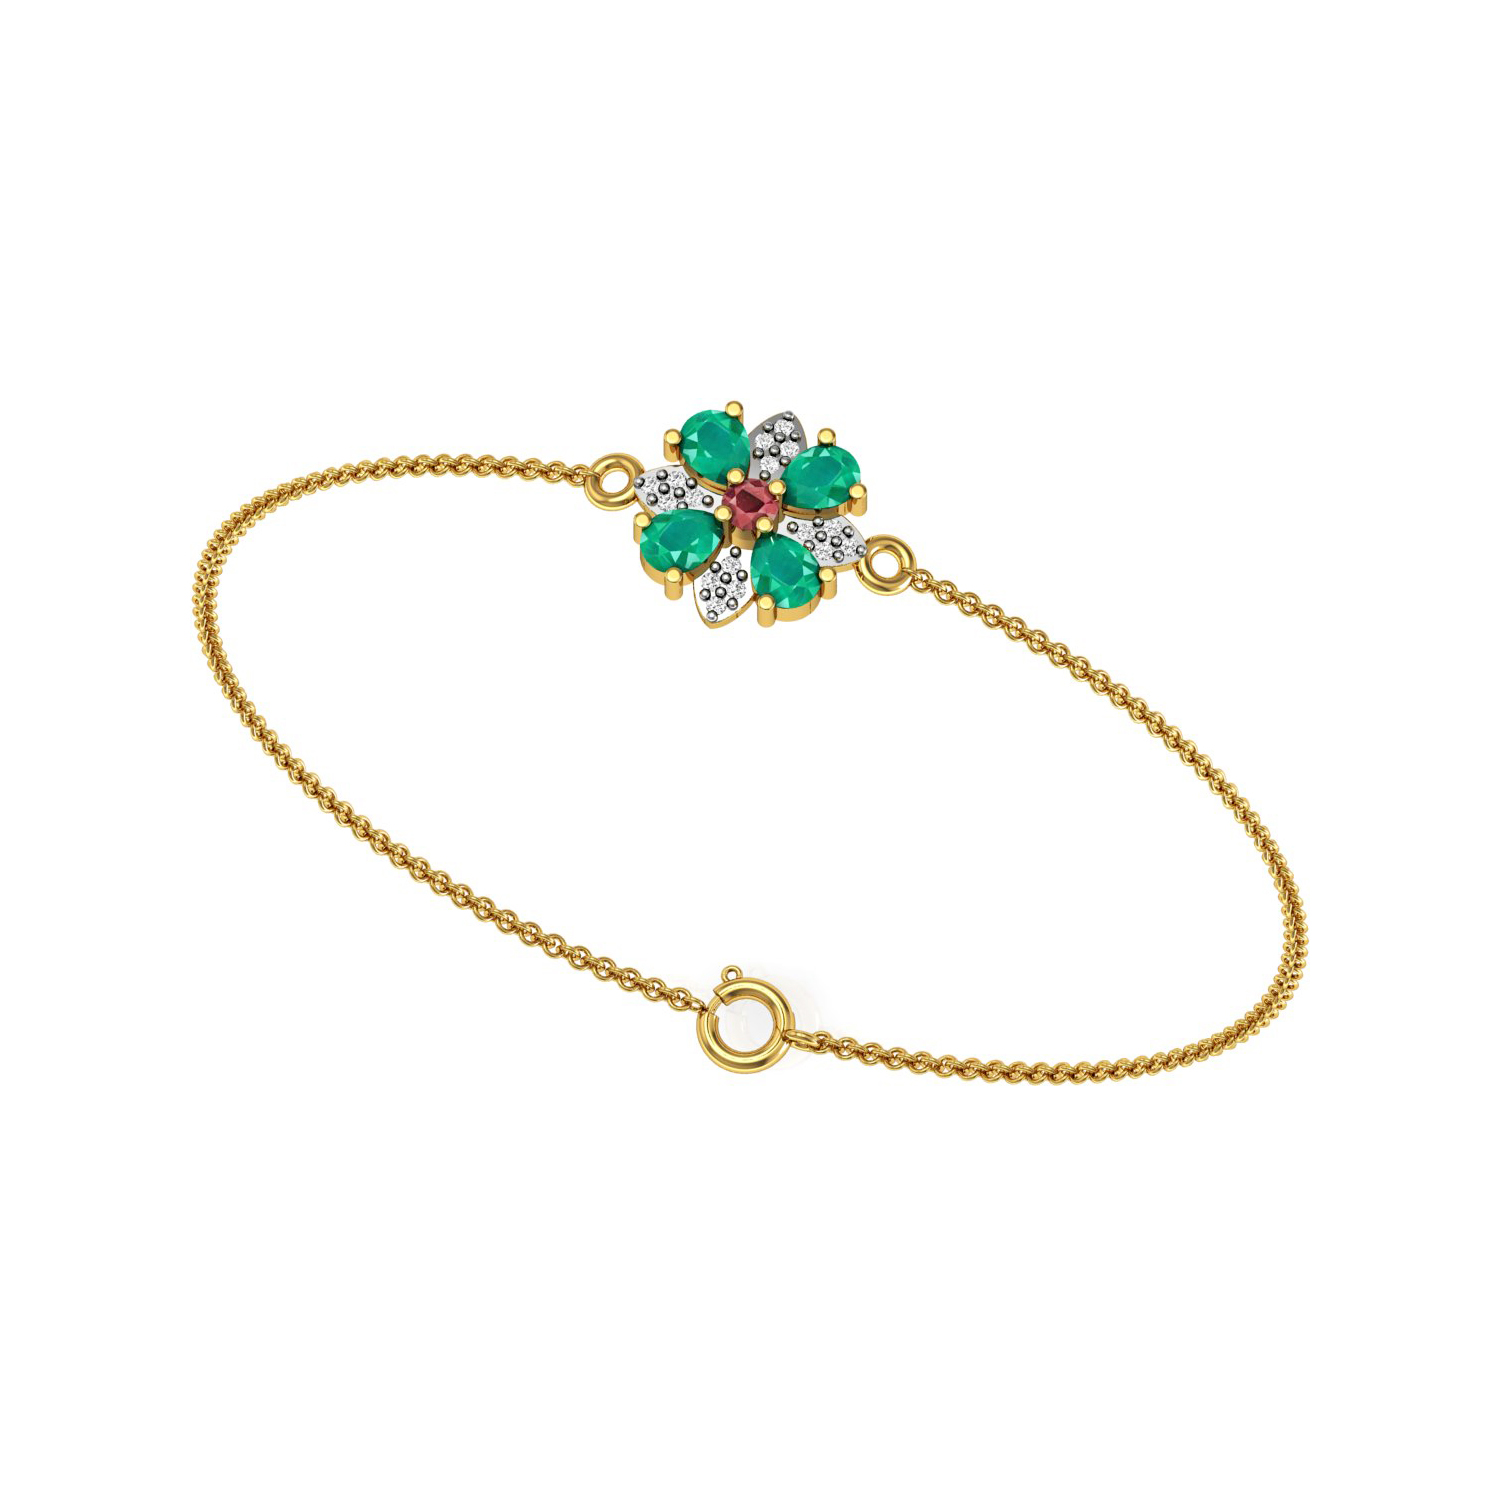 Ruby Emerald Solid Gold Diamond Floral Chain Bracelet